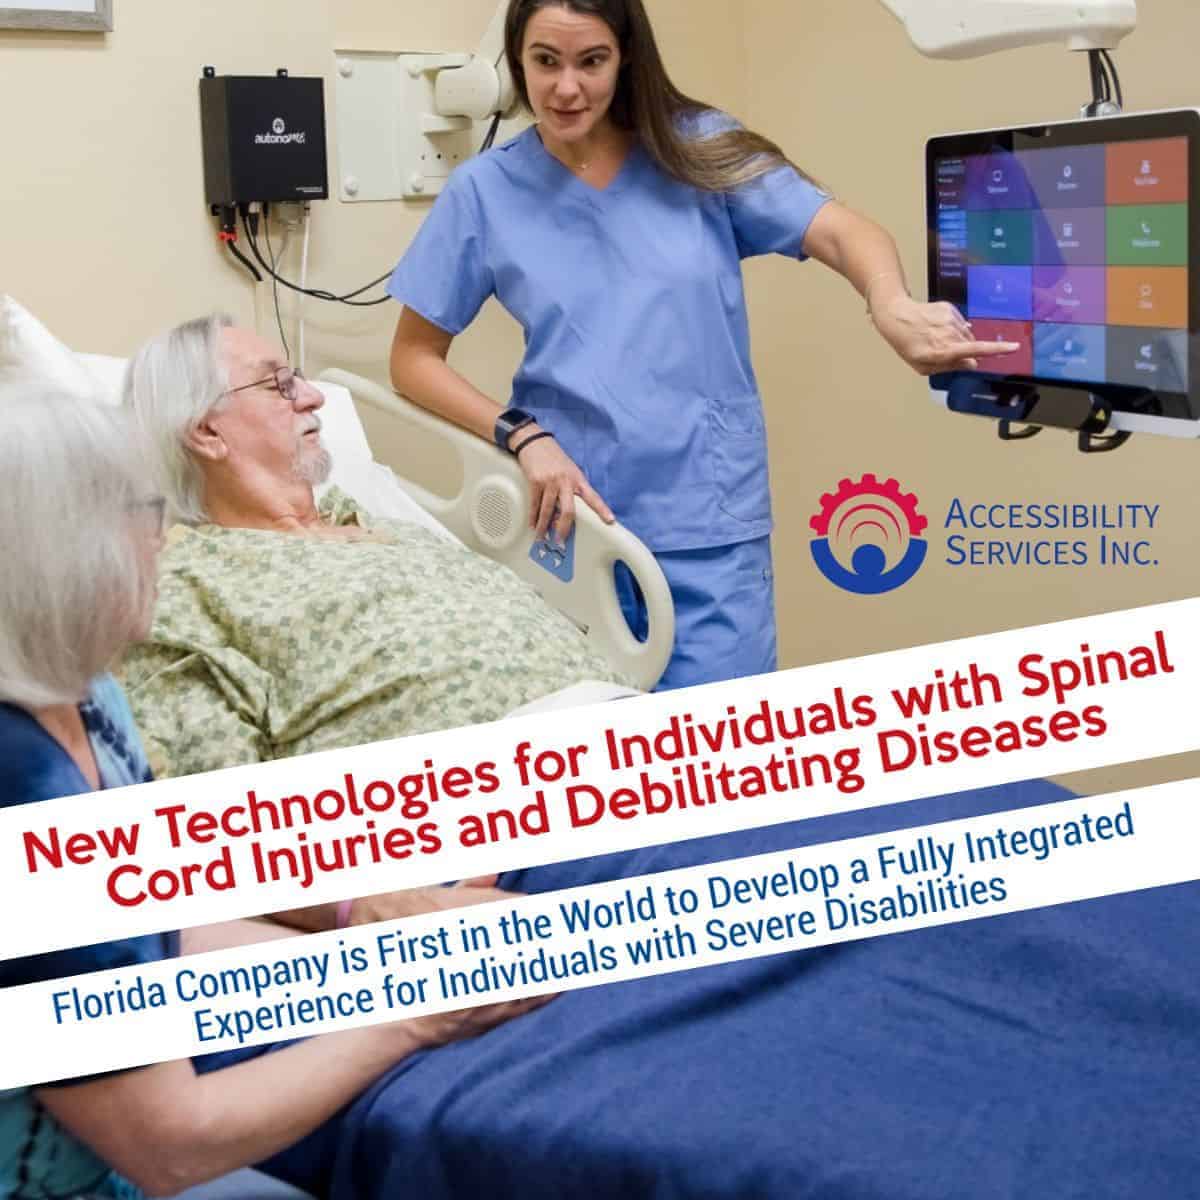 New Technologies for Individuals with Spinal Cord Injuries and Debilitating Diseases